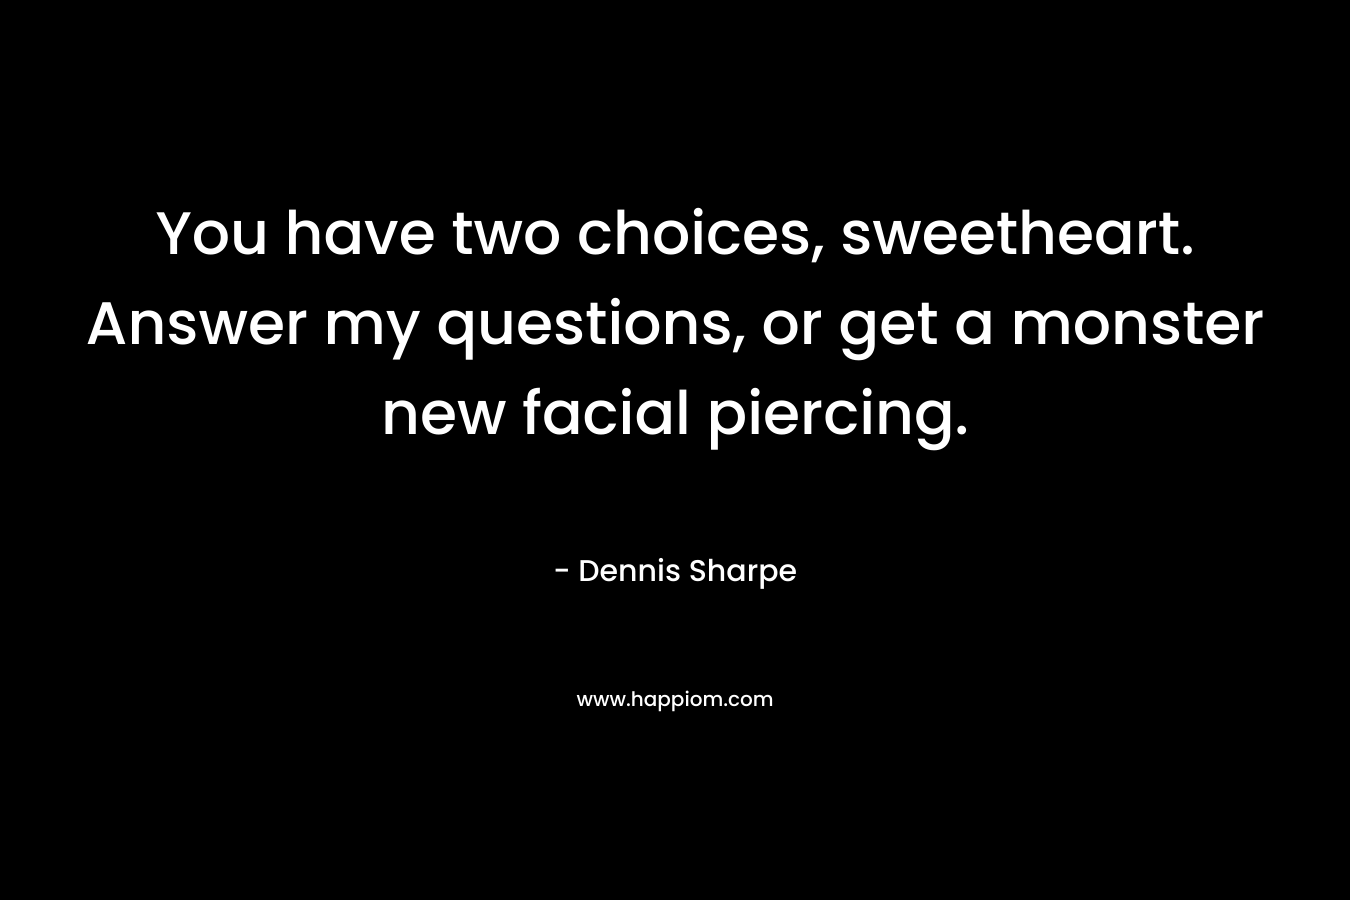 You have two choices, sweetheart. Answer my questions, or get a monster new facial piercing.